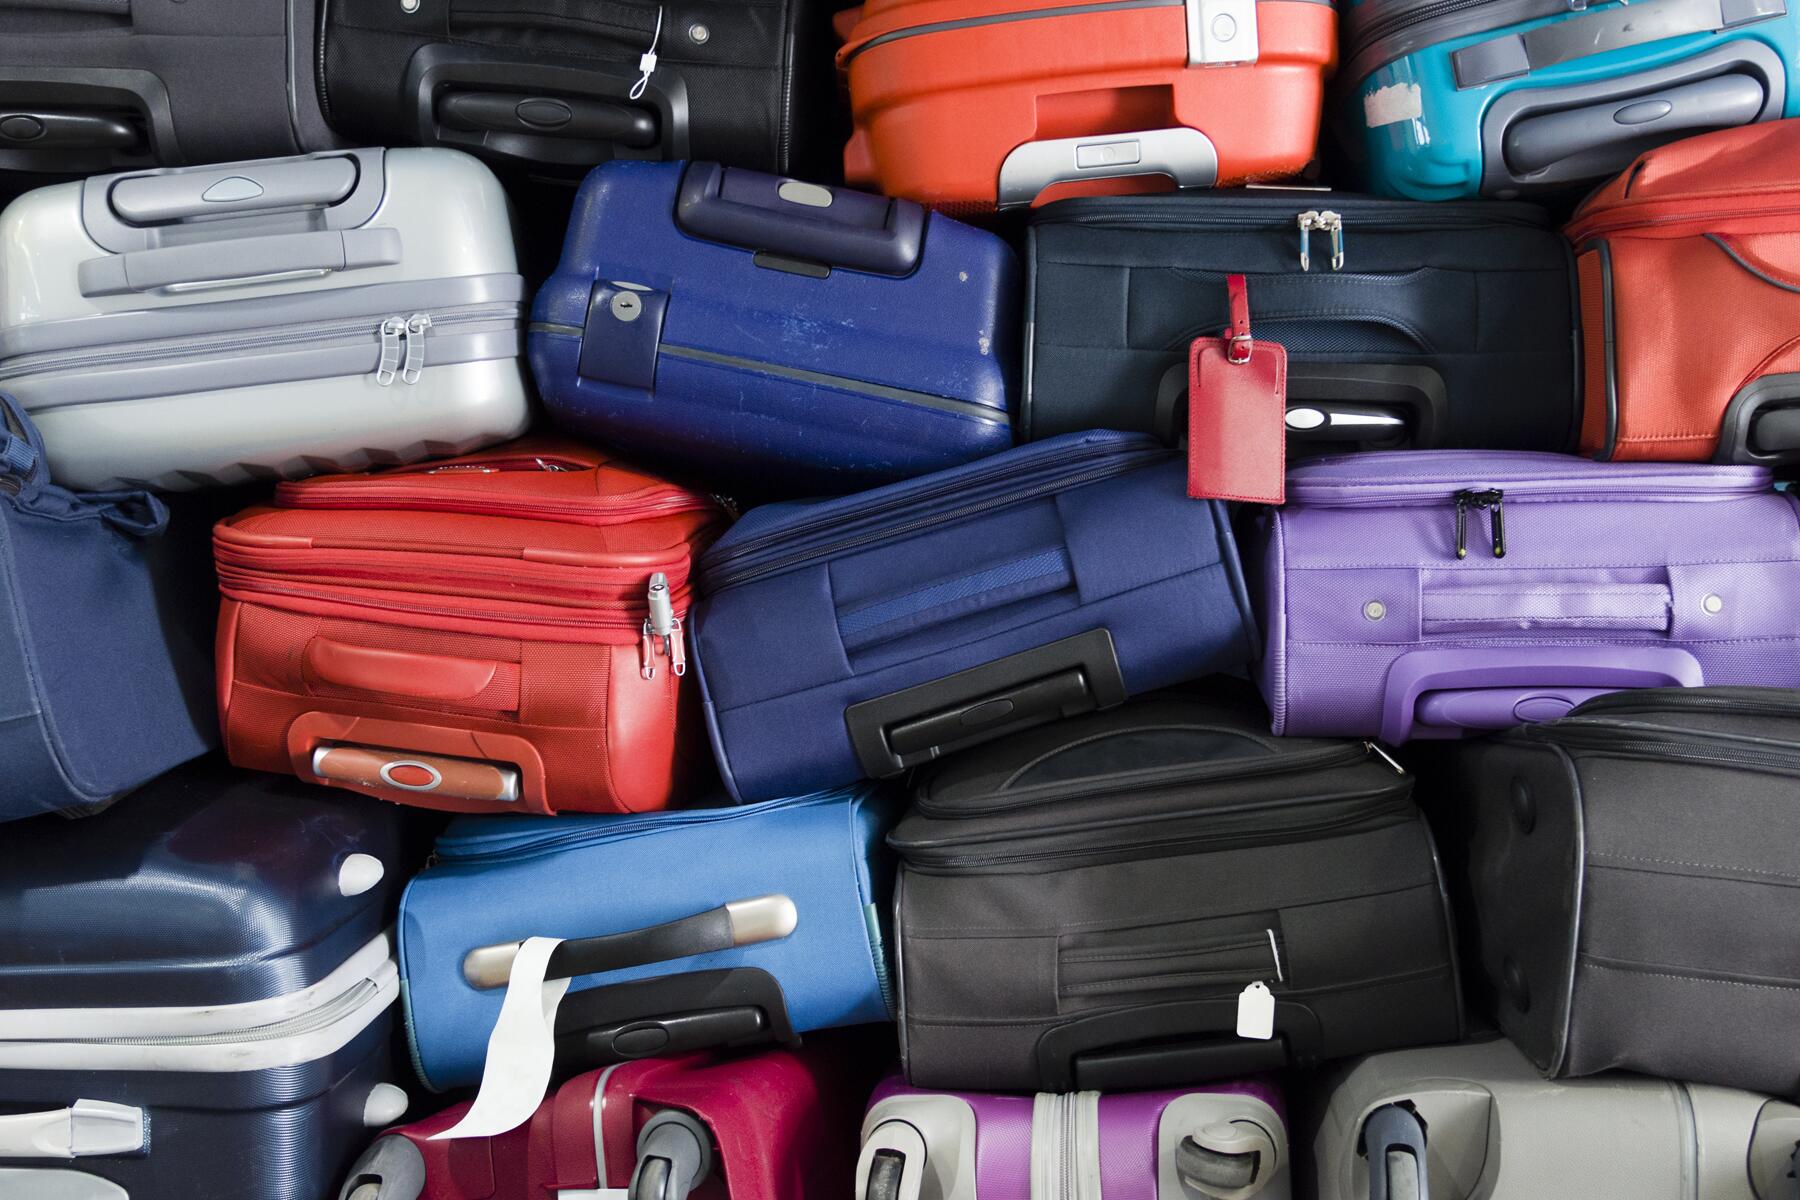 Best Apps to Help With Storing Luggage